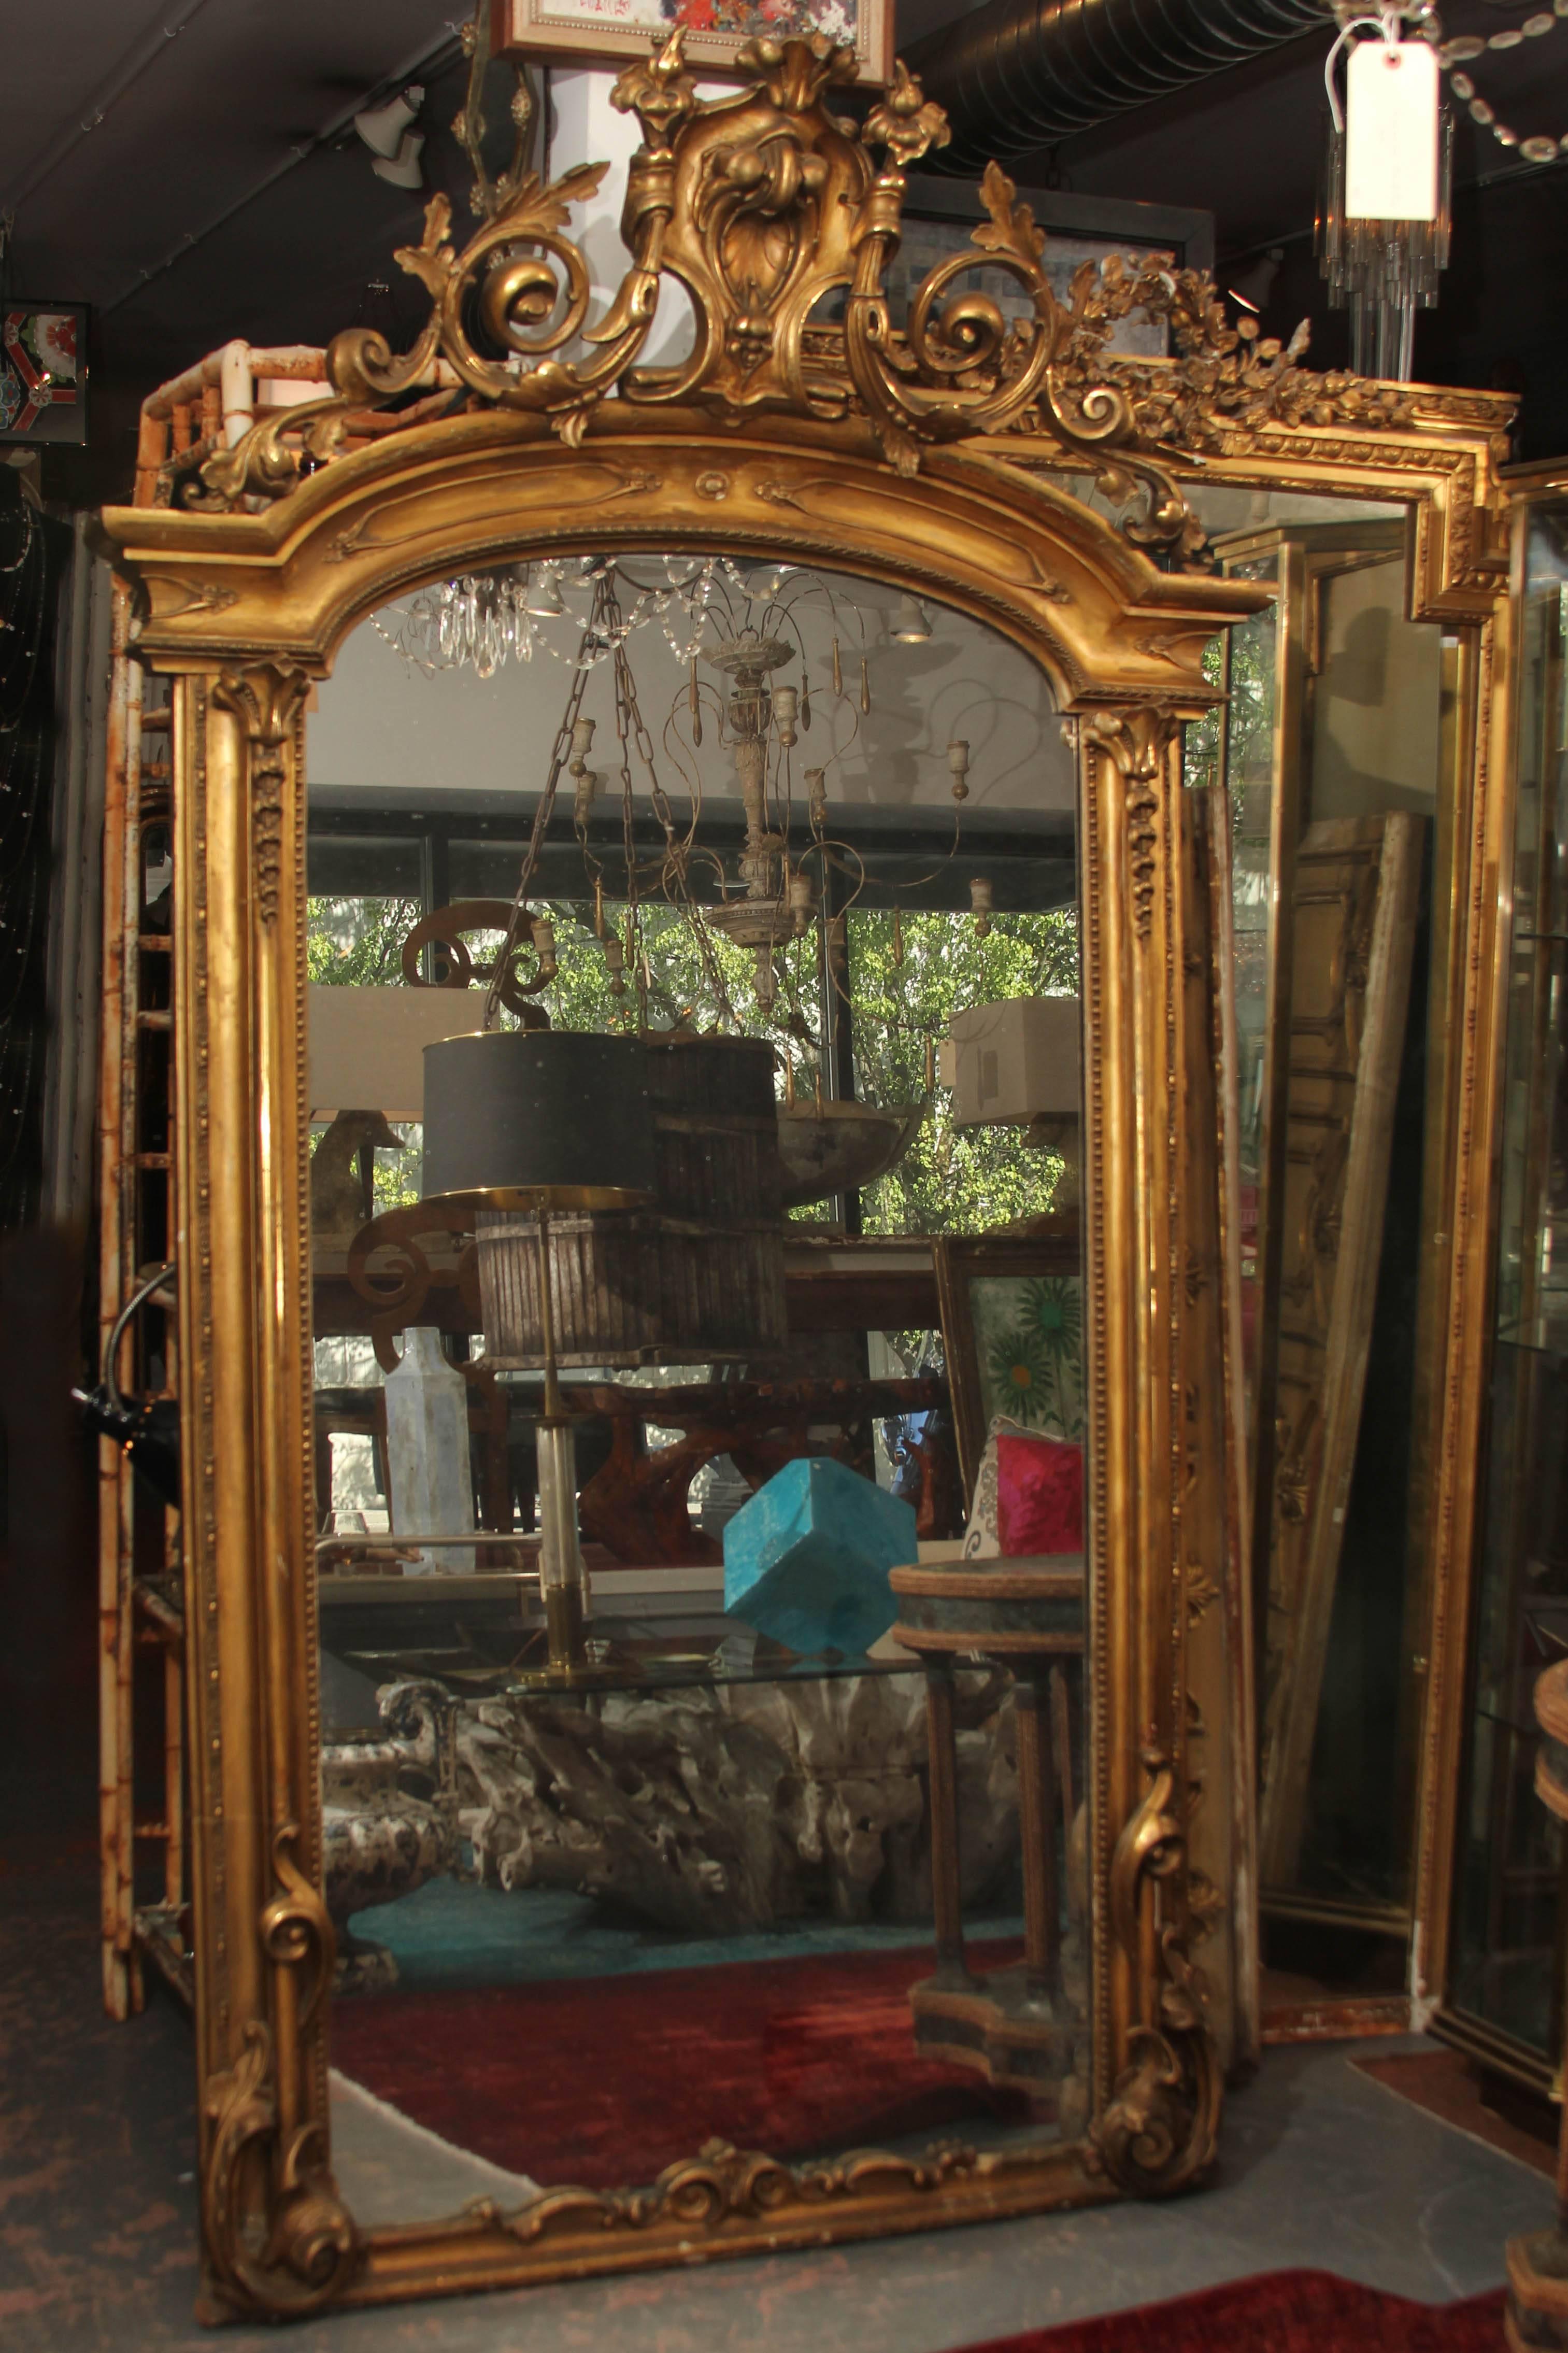 Beautiful ornate antique floor mirror with original glass. Great color and patina to the frame and lots of sparkling diamond dust in the mirror when the light hits it just right.